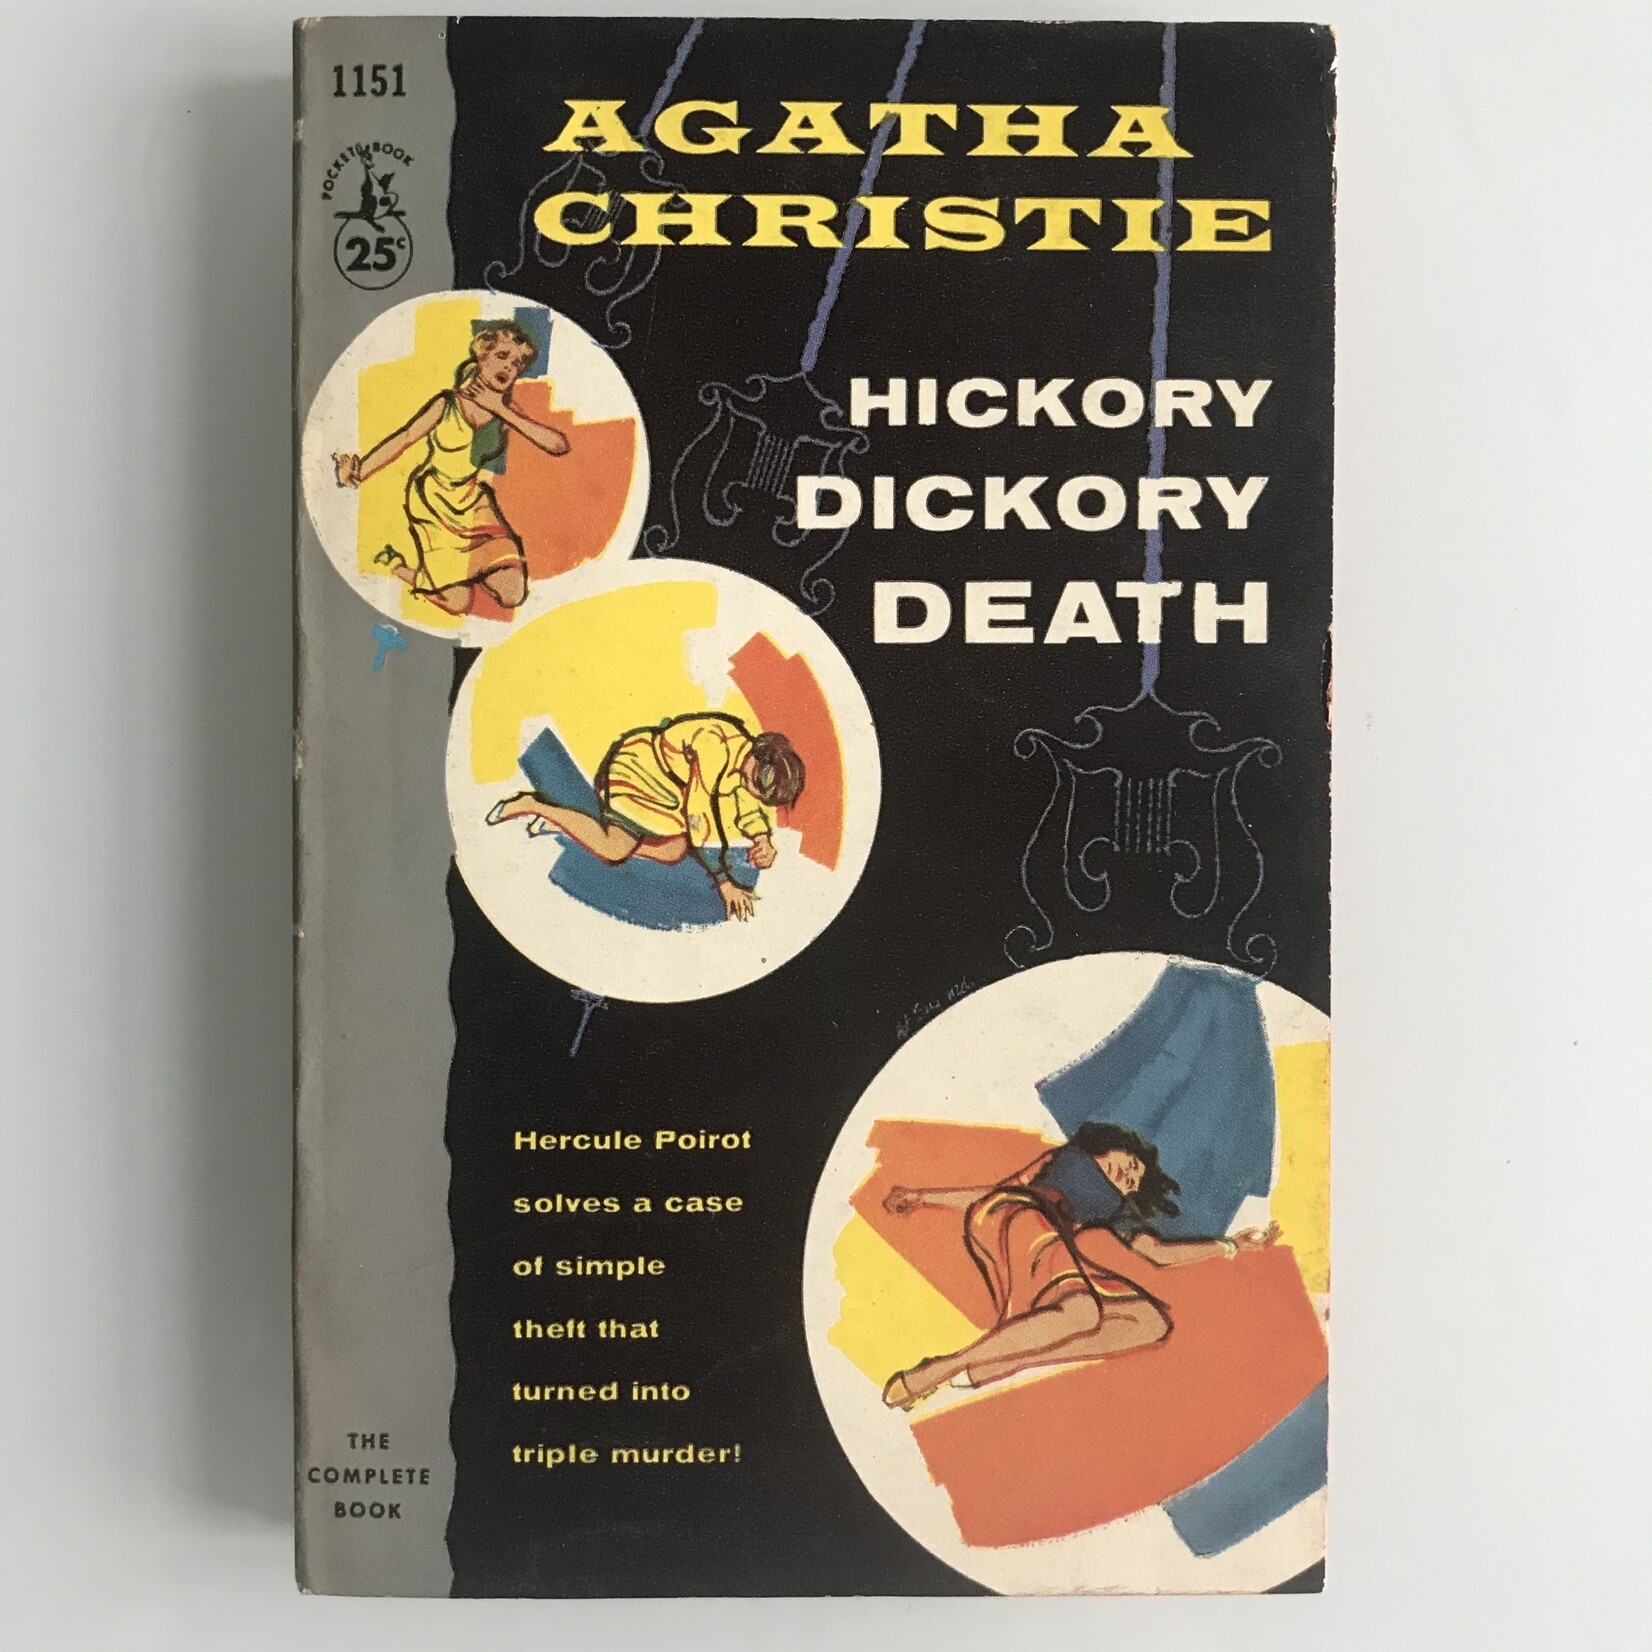 Agatha Christie - Hickory Dickory Death (Silver Pocket Book Edition) - Paperback (USED - VG)